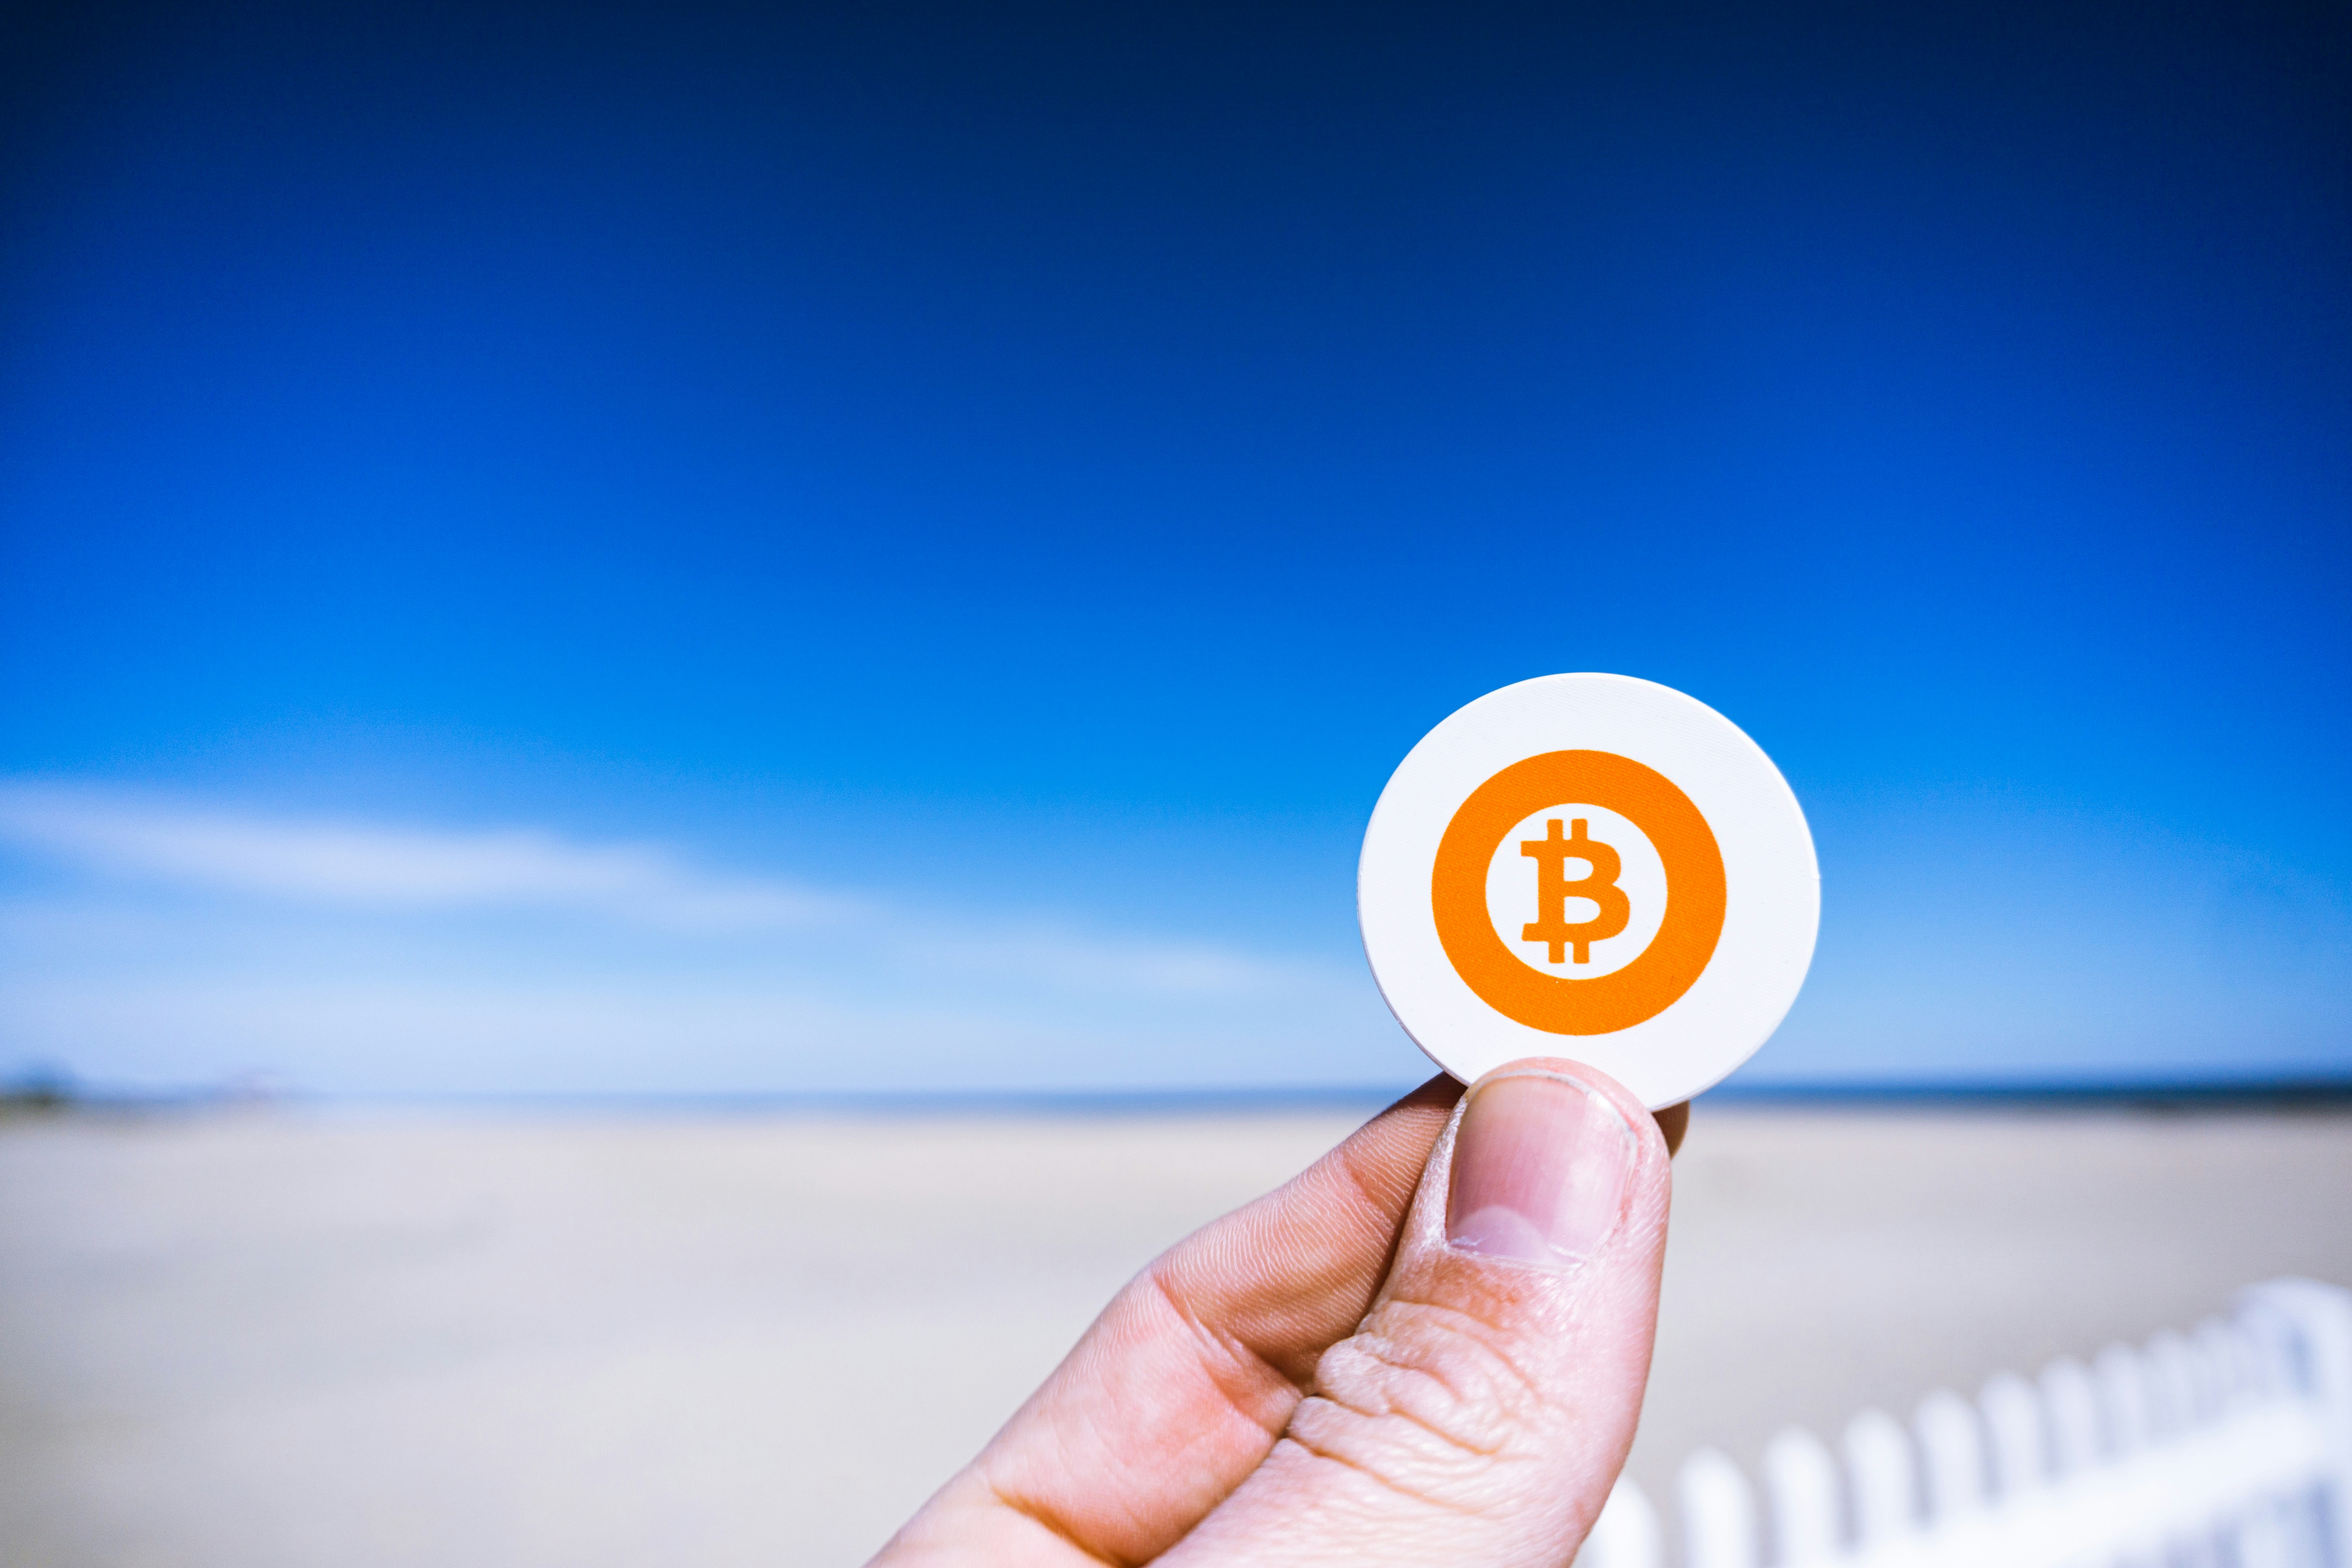 Holding a 'Bitcoin' at the beach